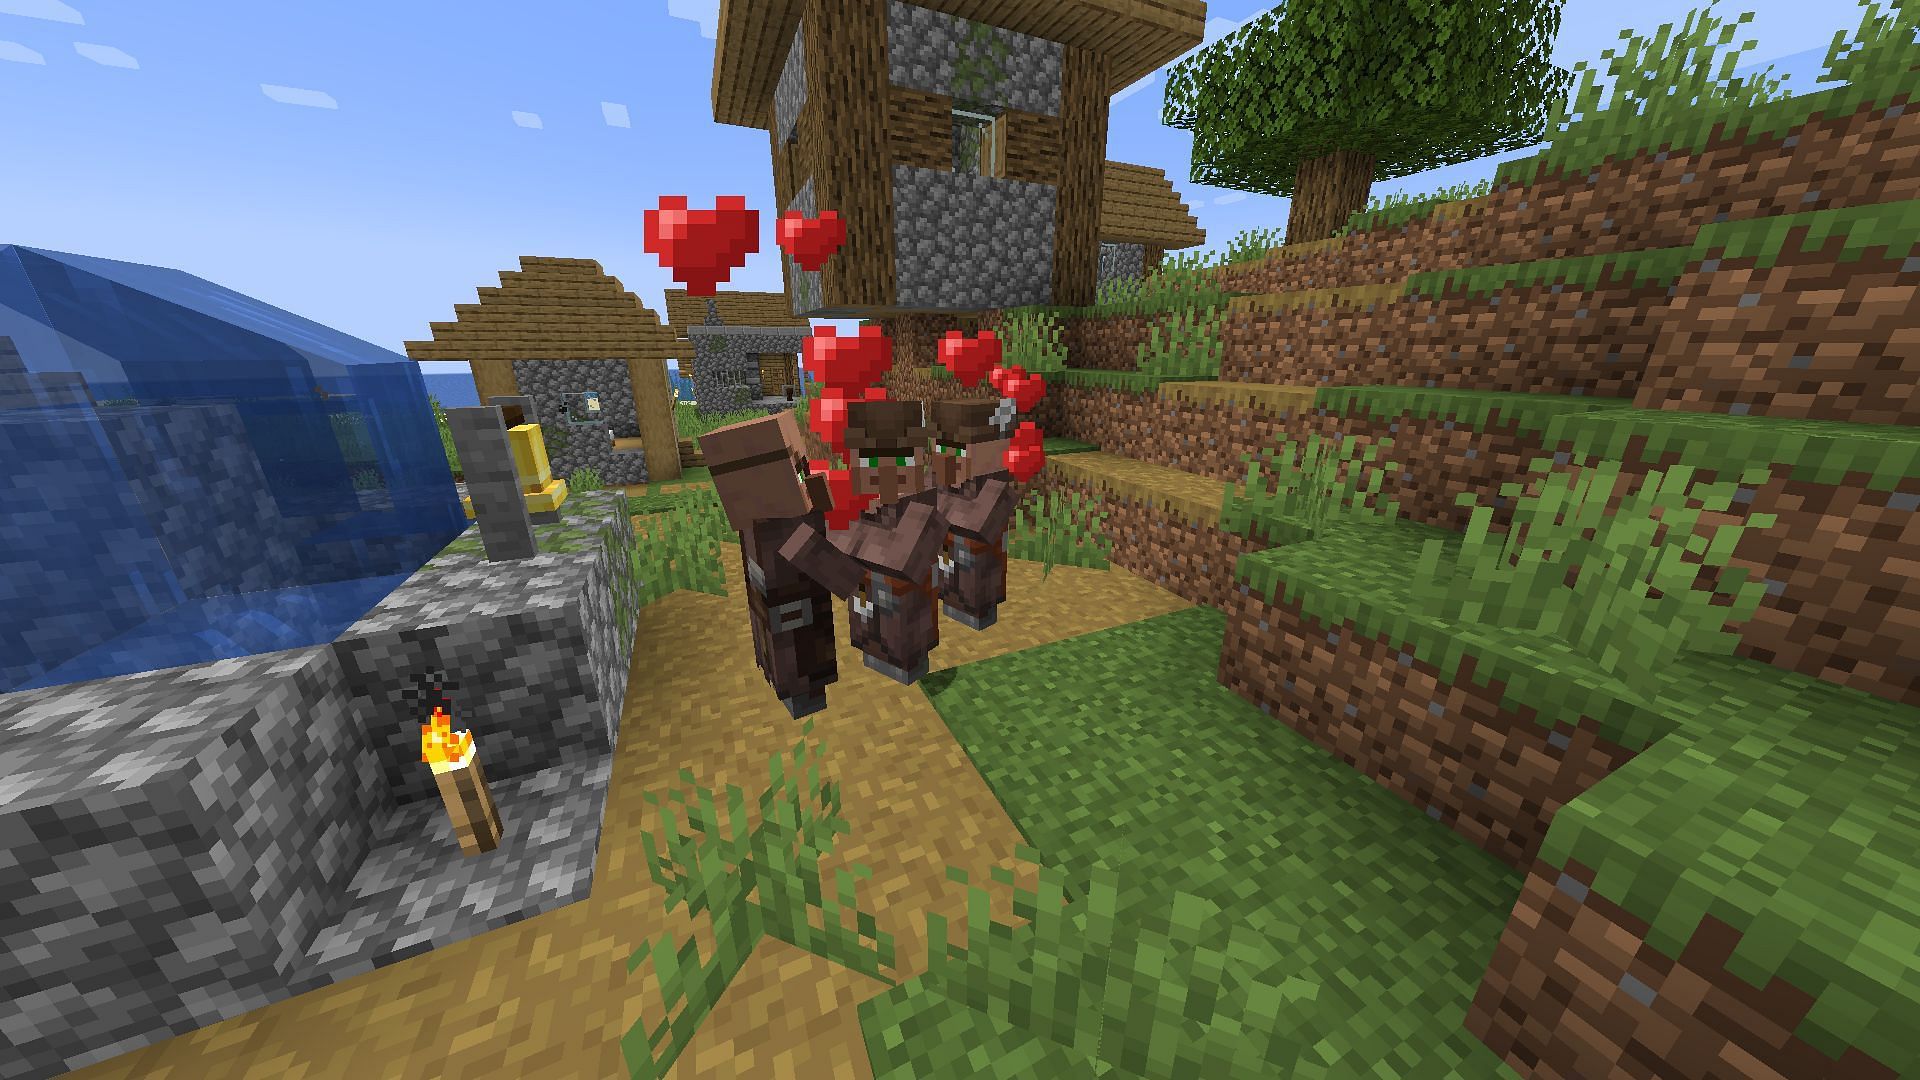 After breeding, villagers enter a cooldown period where they cannot breed in Minecraft (Image via Mojang)